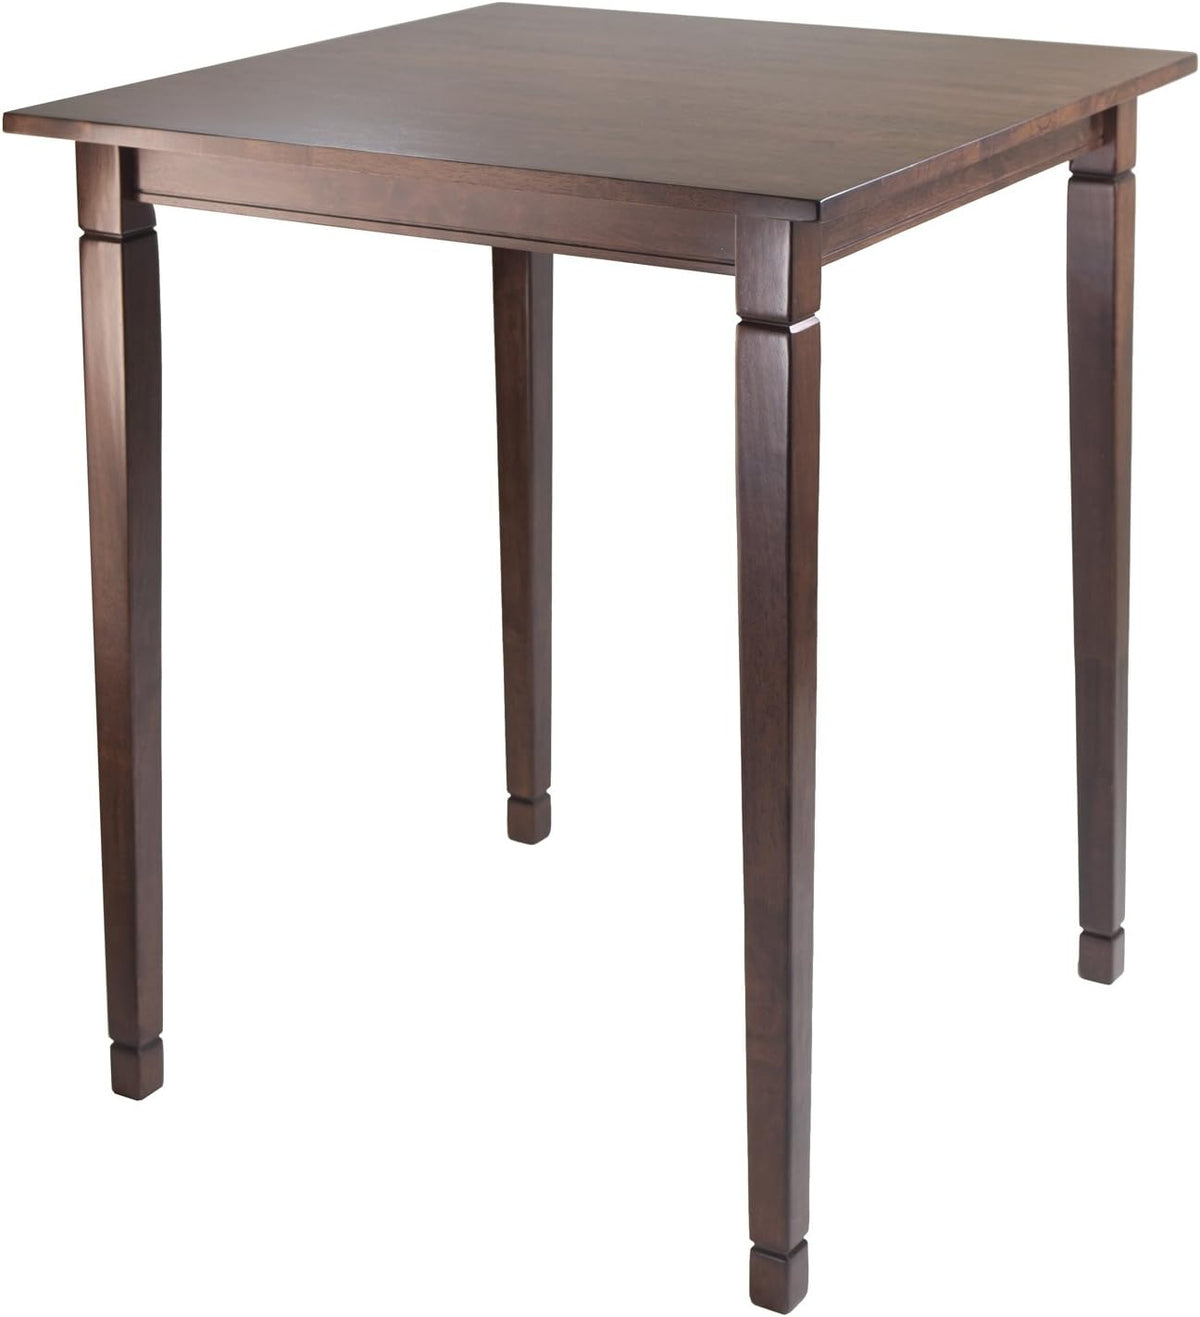 Winsome Kingsgate 38.9 x 33.8 x 33.8-Inch Wood Square Tapered Legs High Table, Antique Walnut (94634)